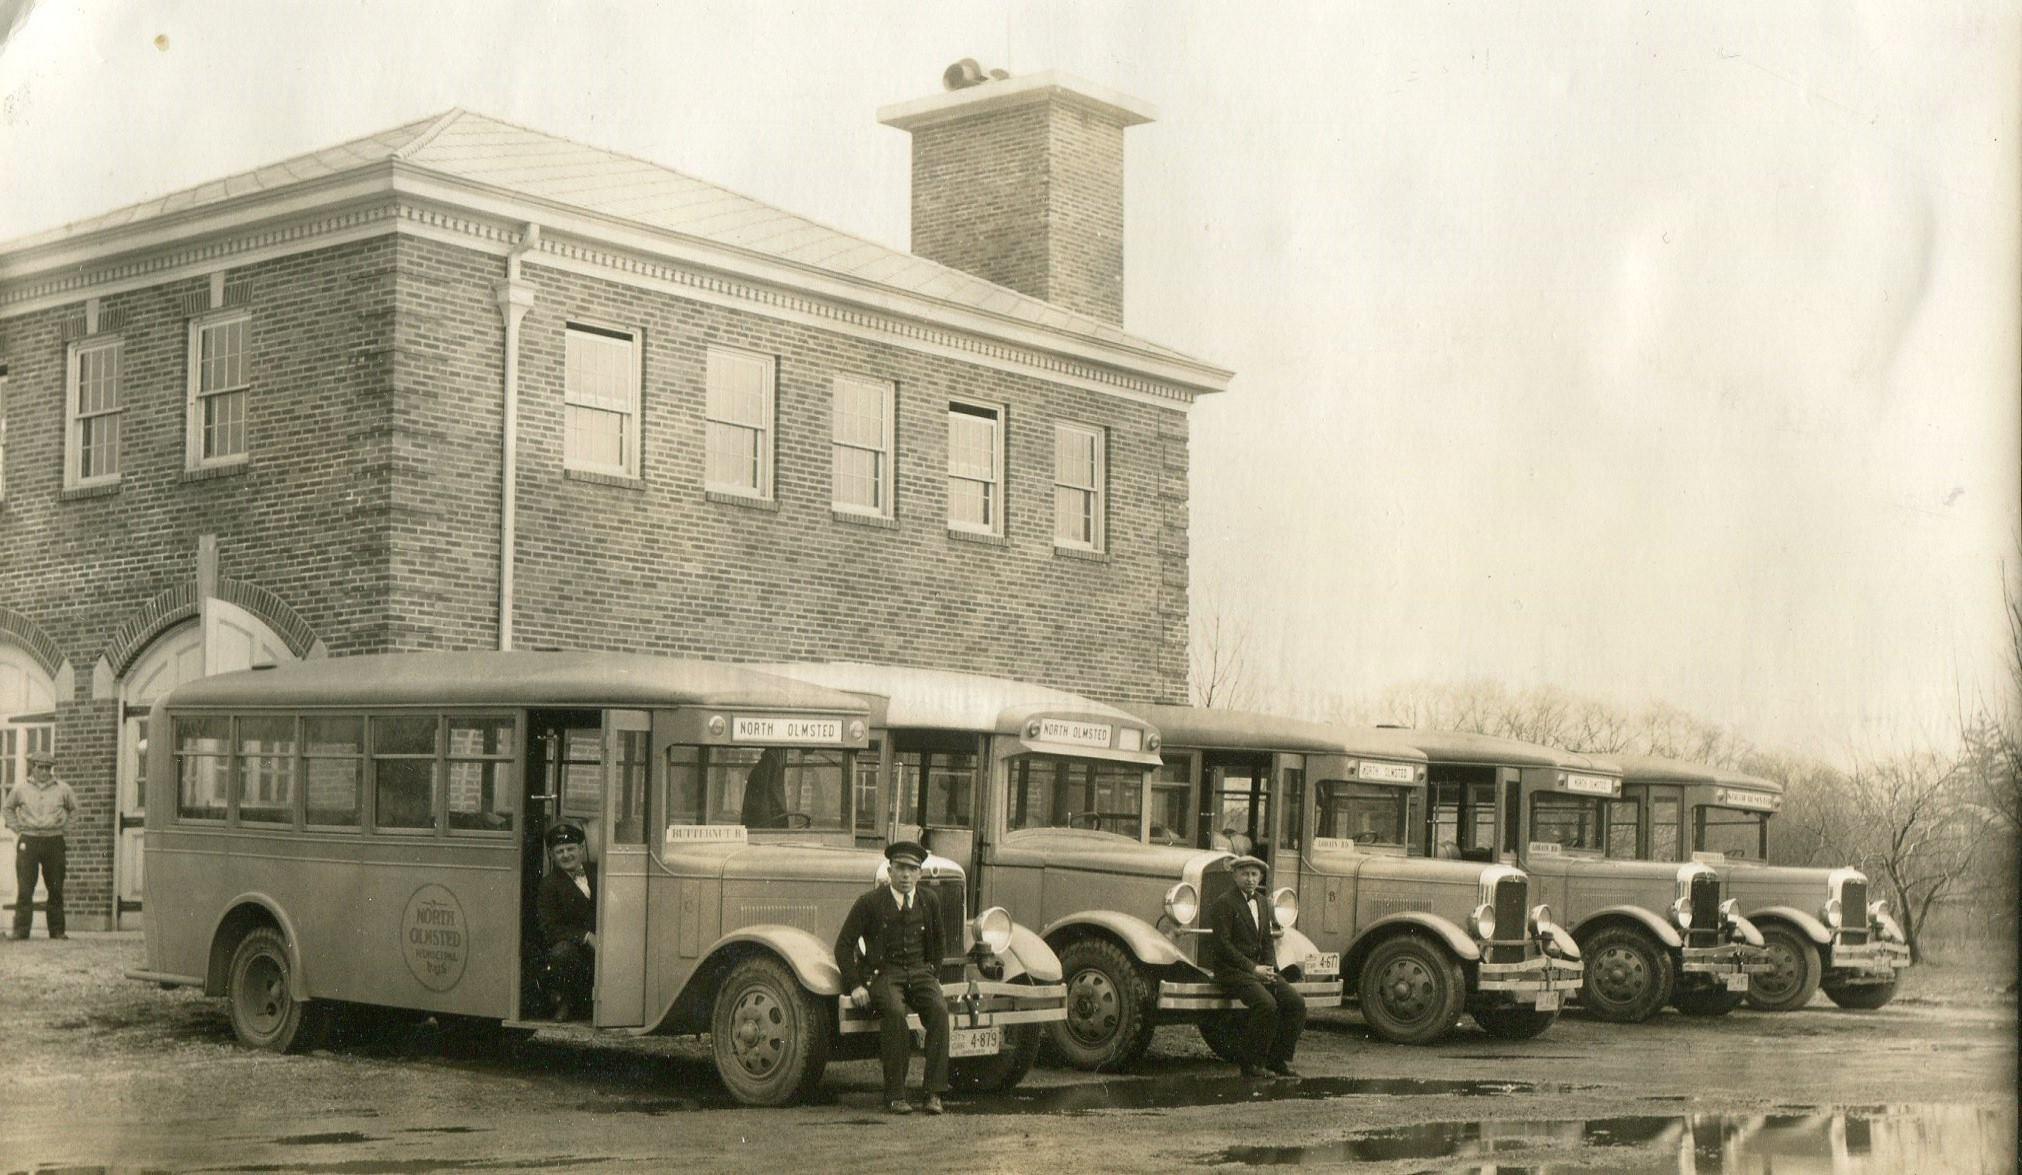 Five buses are lined up in a row in front of the North Olmsted Municipal Bus Line garage in this circa 1932 photograph with several drivers posed with the buses.